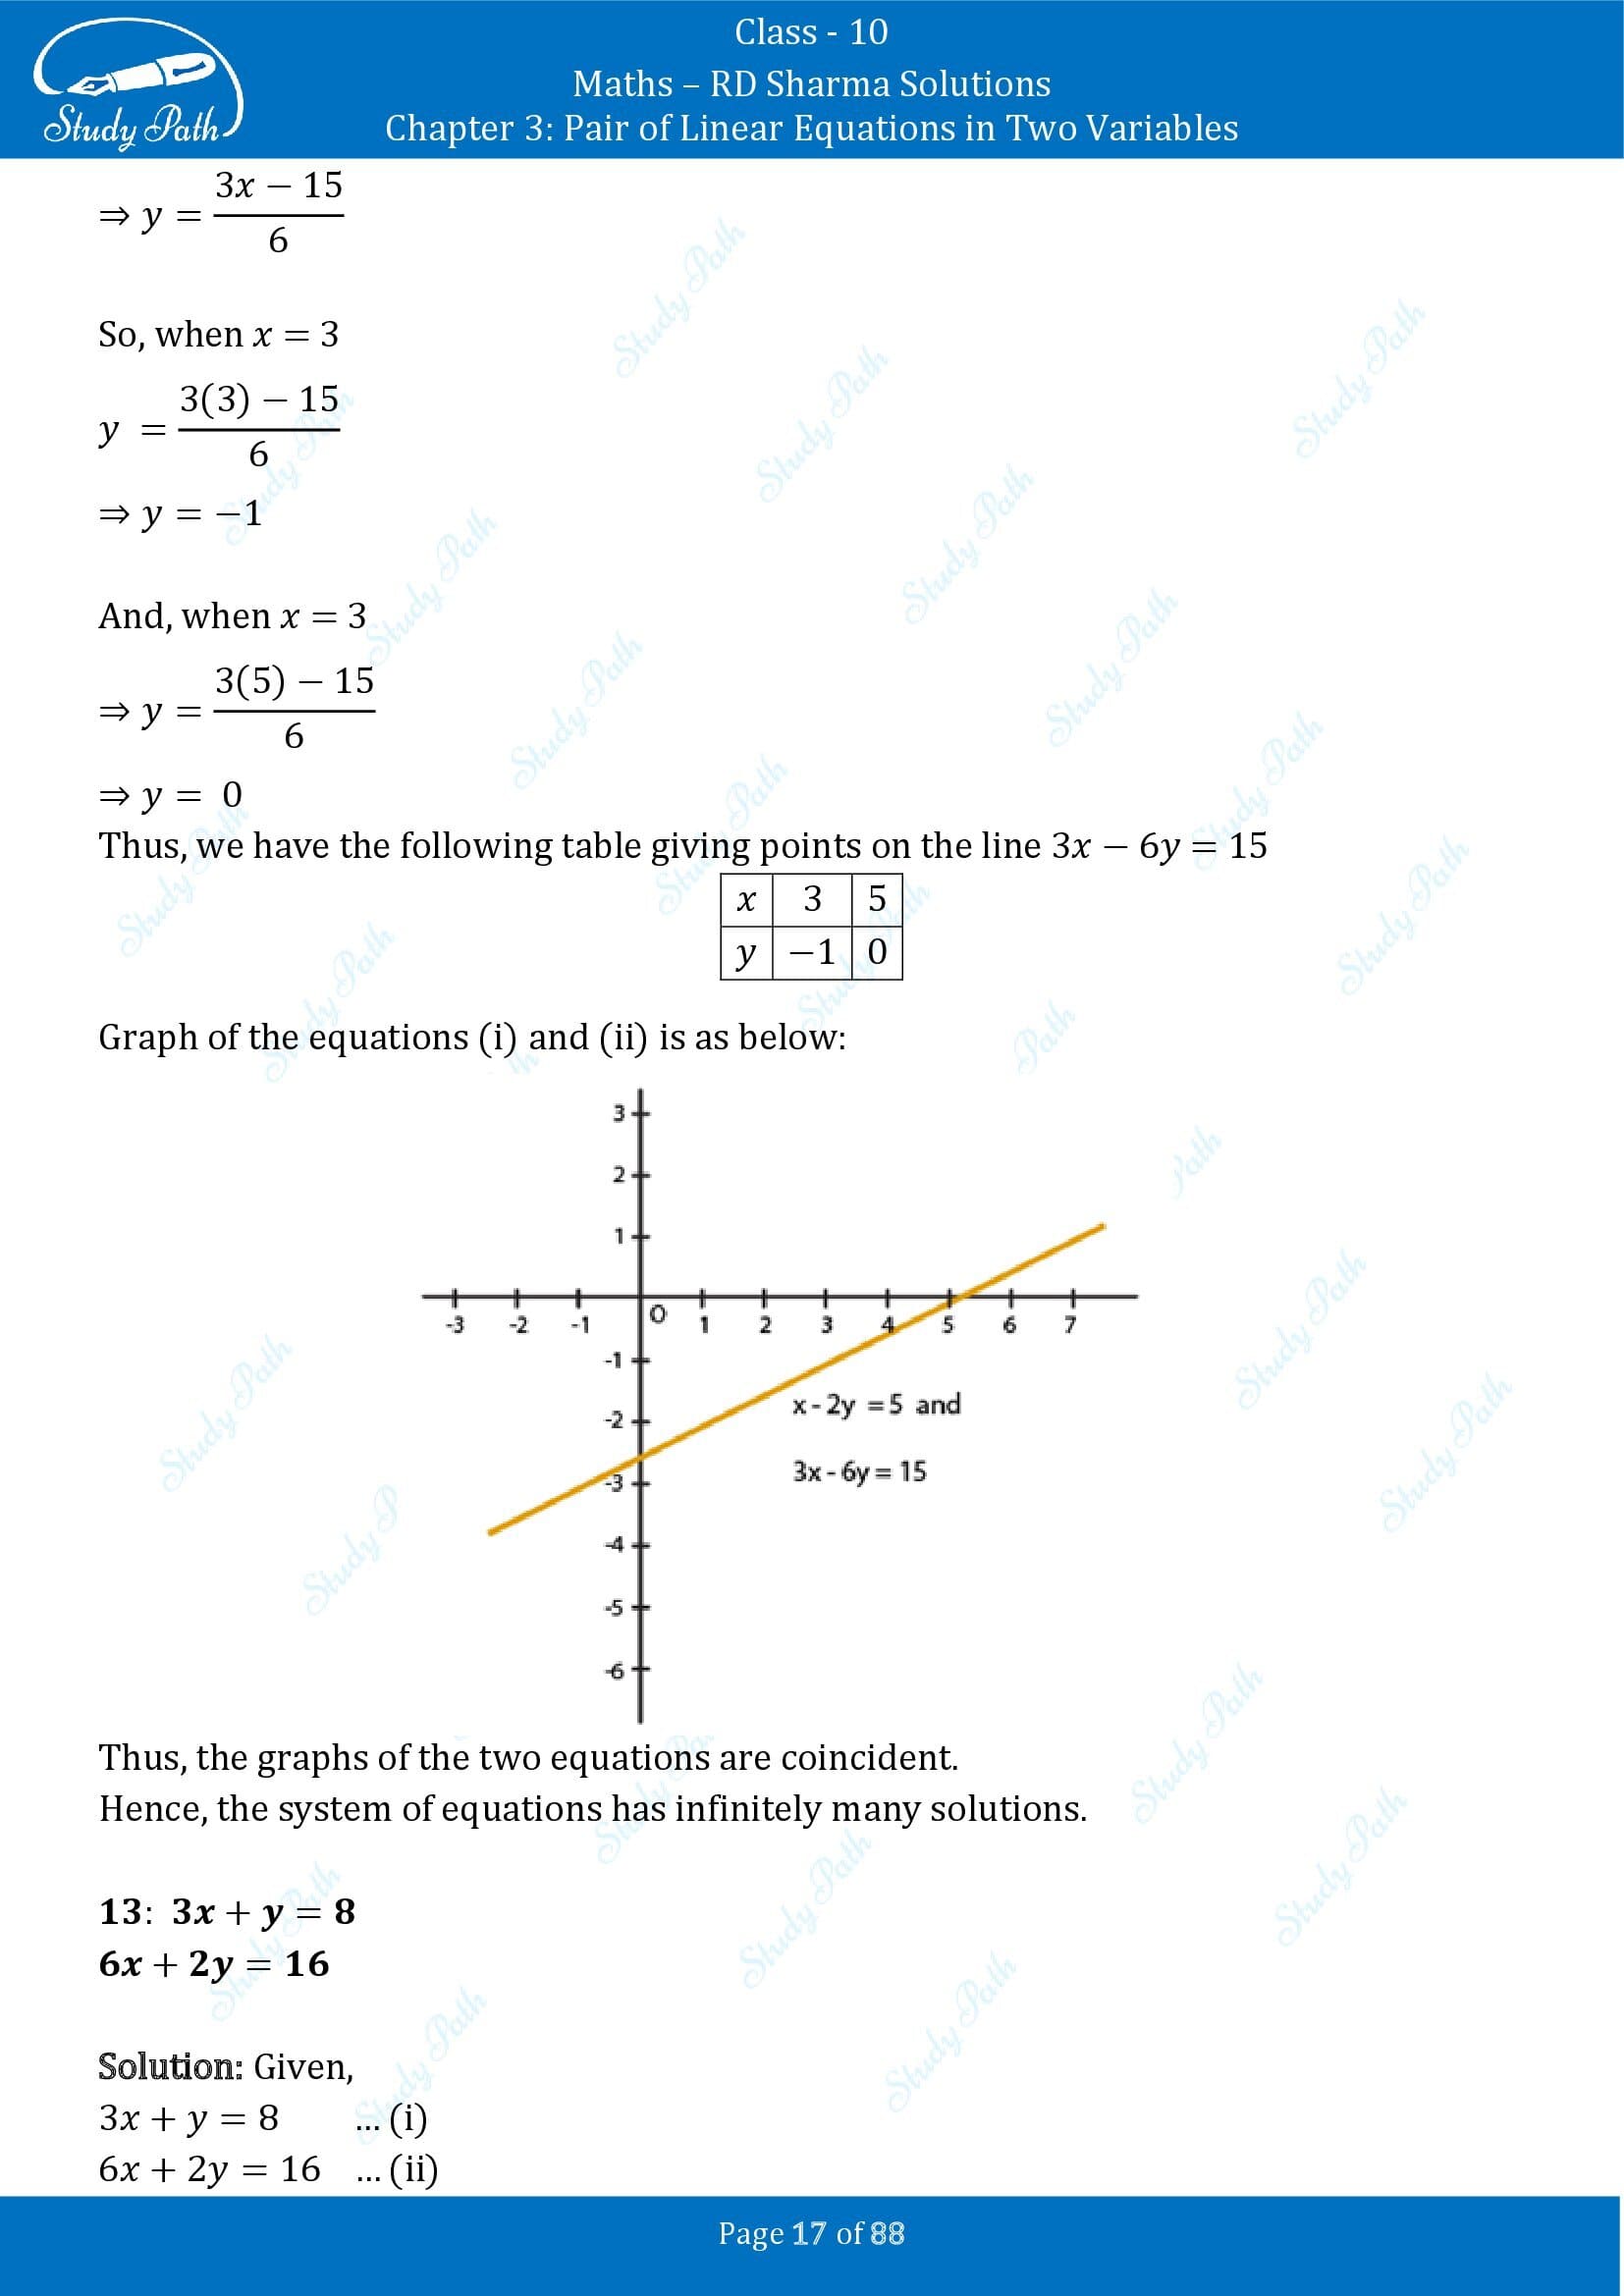 RD Sharma Solutions Class 10 Chapter 3 Pair of Linear Equations in Two Variables Exercise 3.2 00017